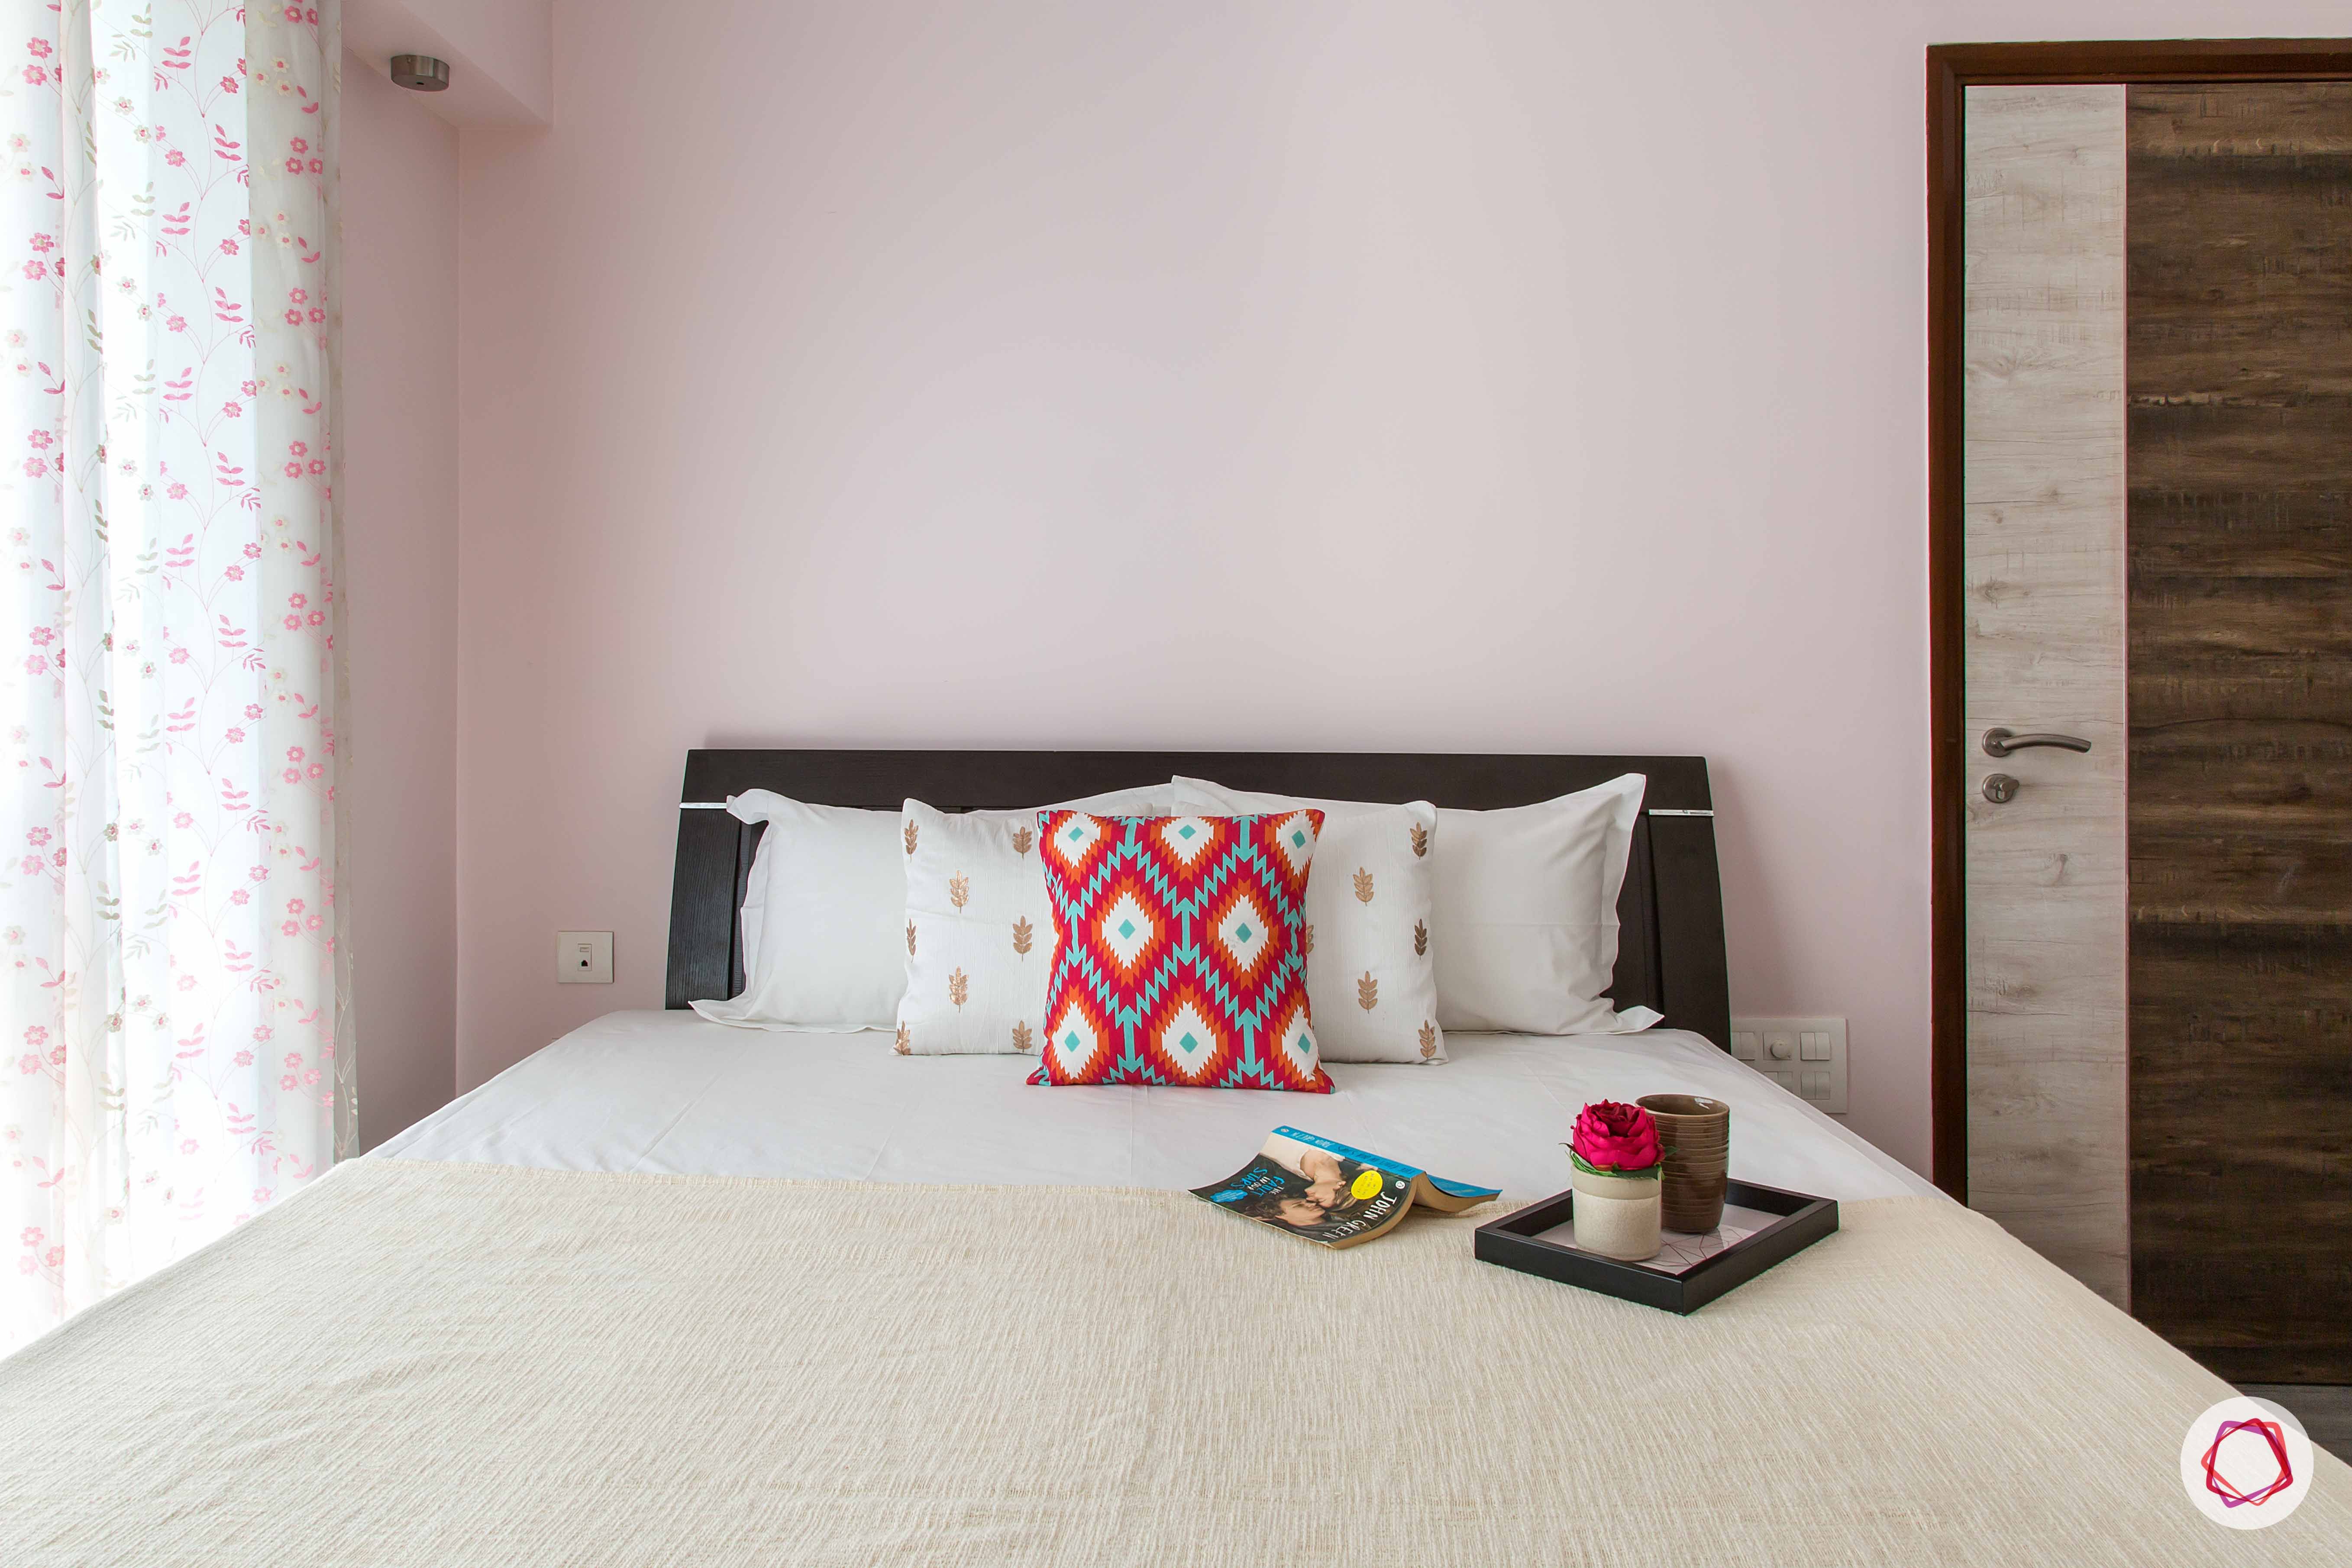 pink-white-bed-red-pillow-curtain
